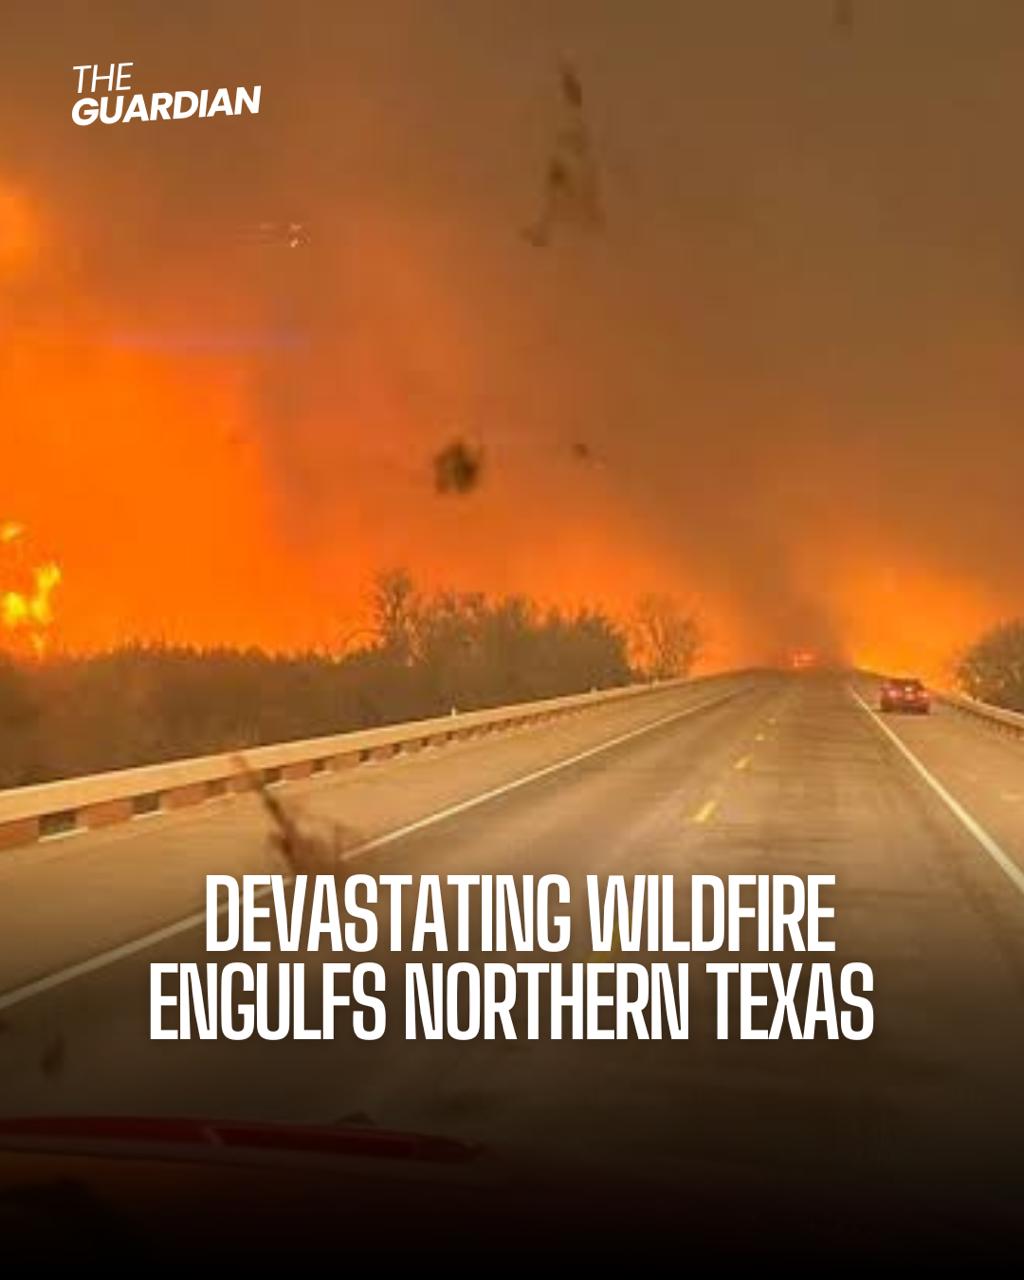 A rapidly spreading Texas wildfire has left one person dead, forced citizens to evacuate, cut off power to houses and businesses, and shortly paused operations at a nuclear weapons facility.